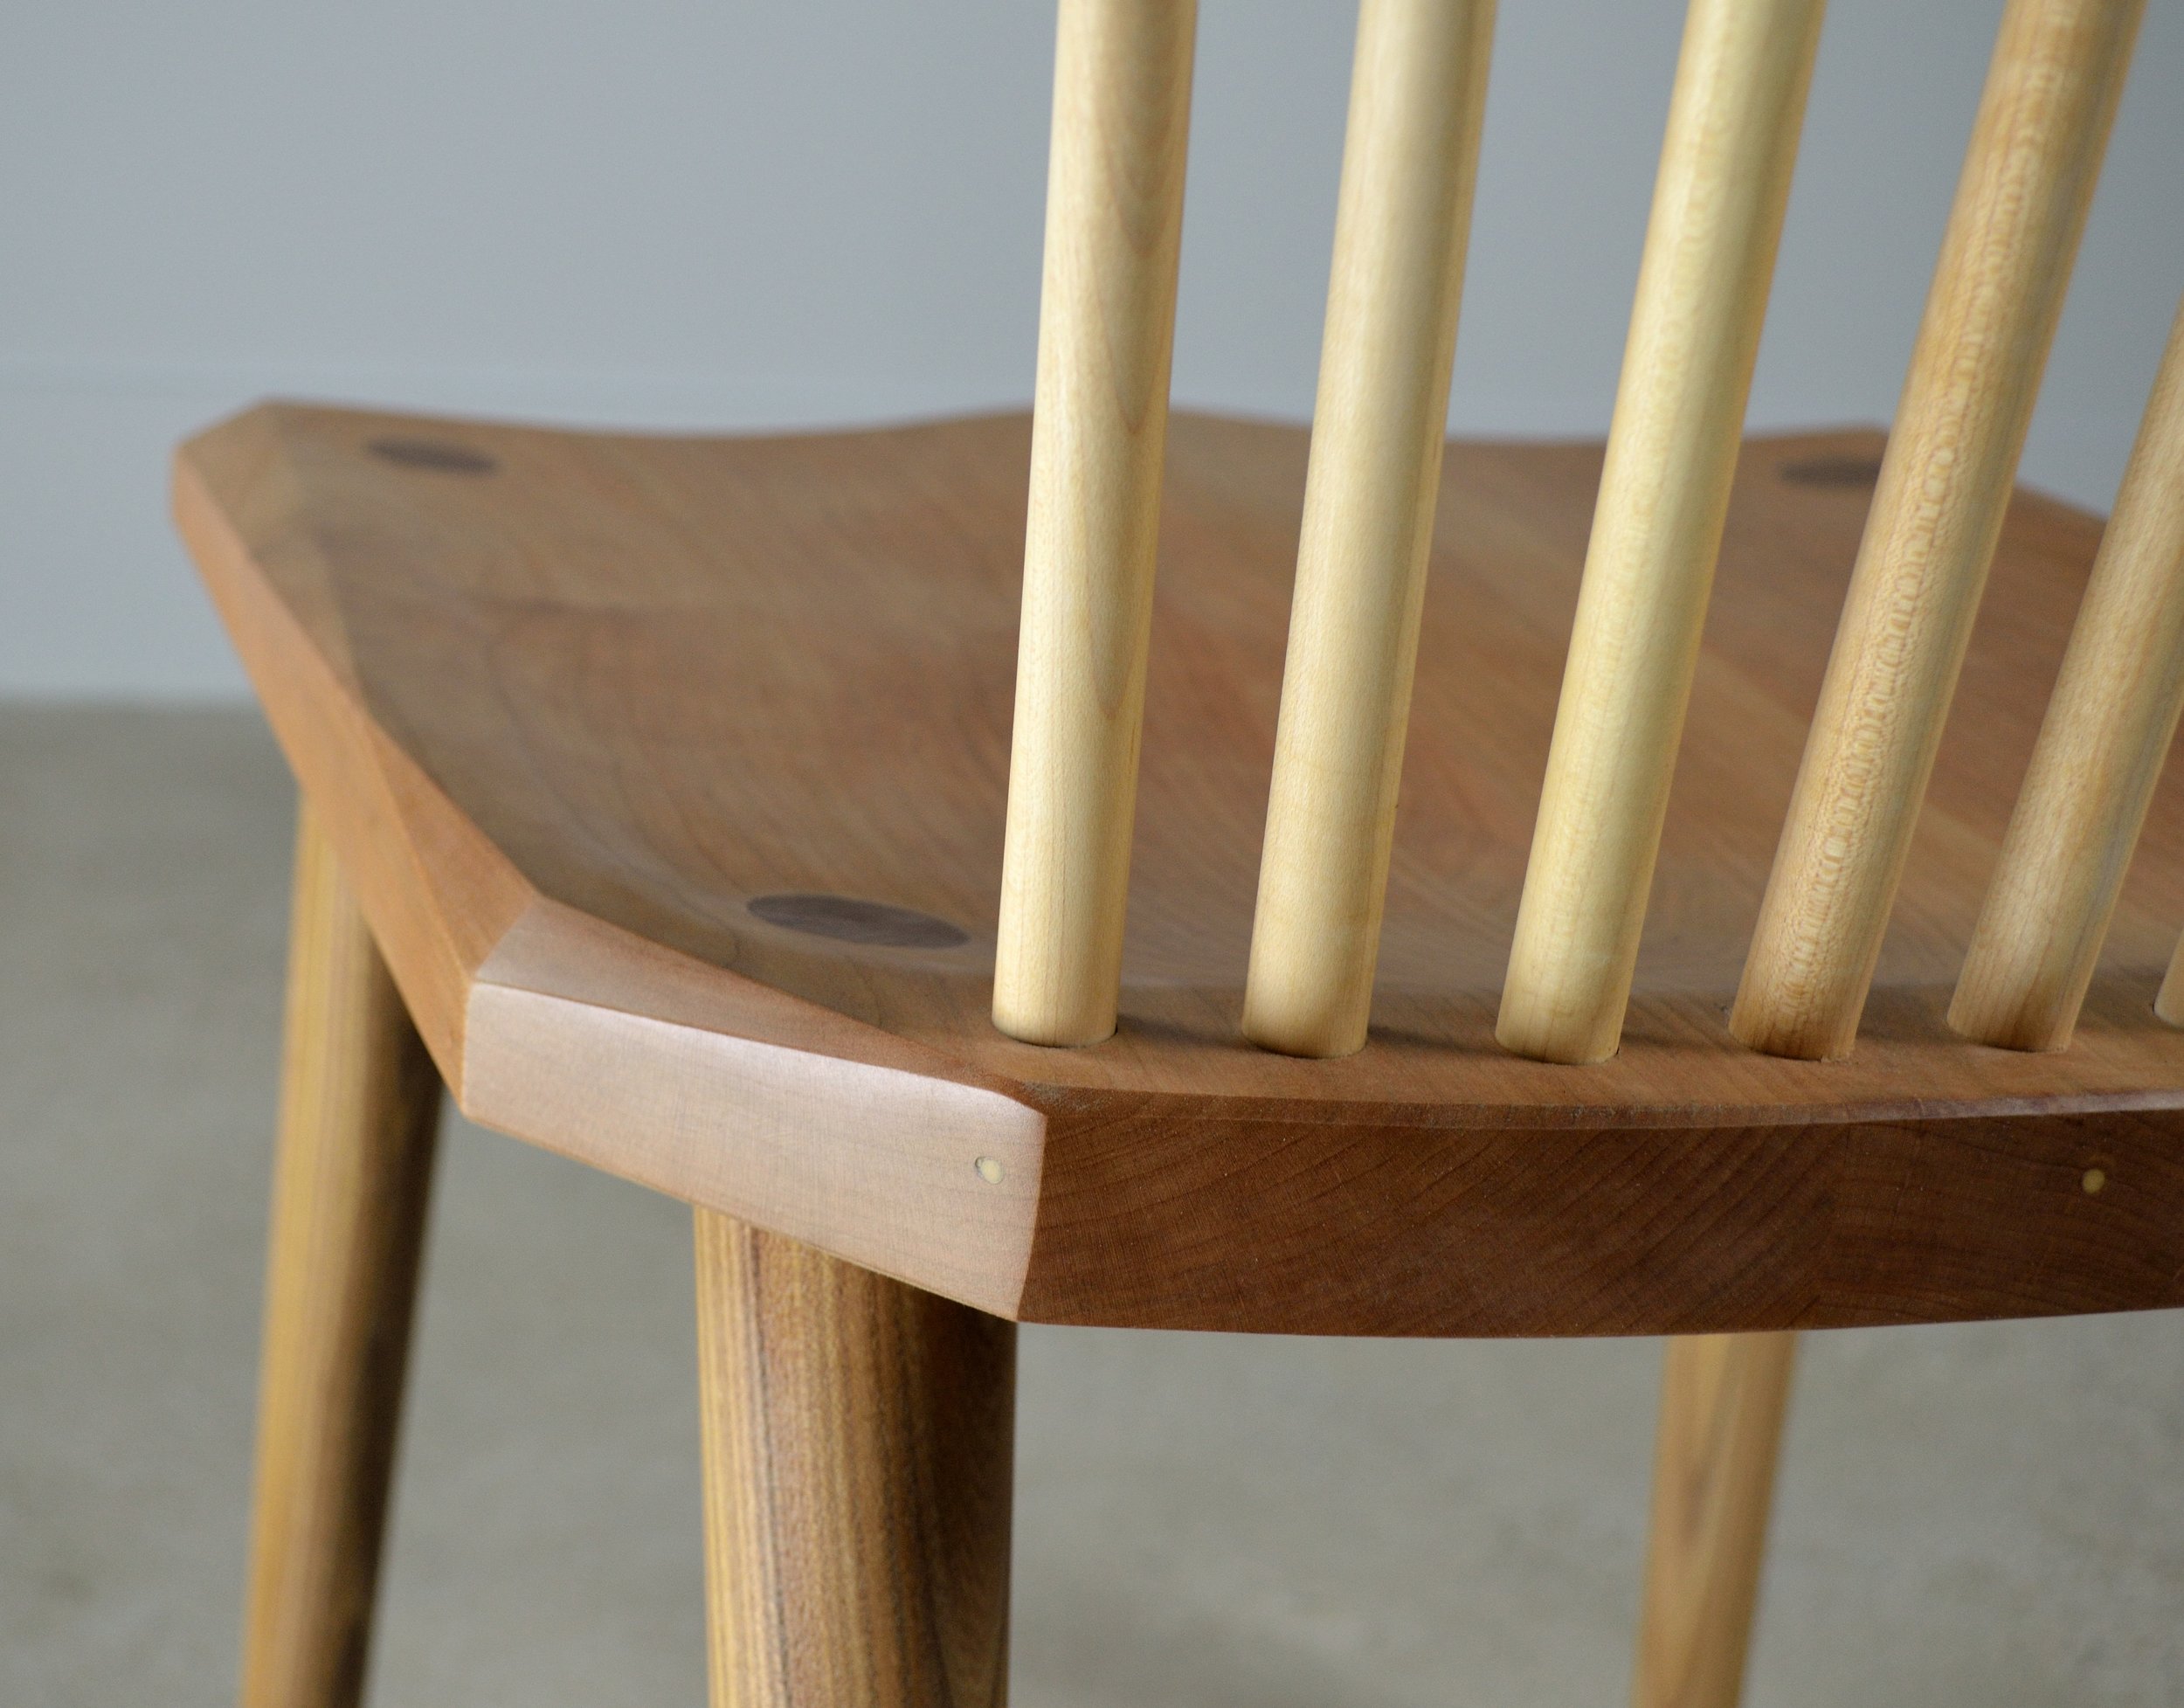 Spindle Back Chair